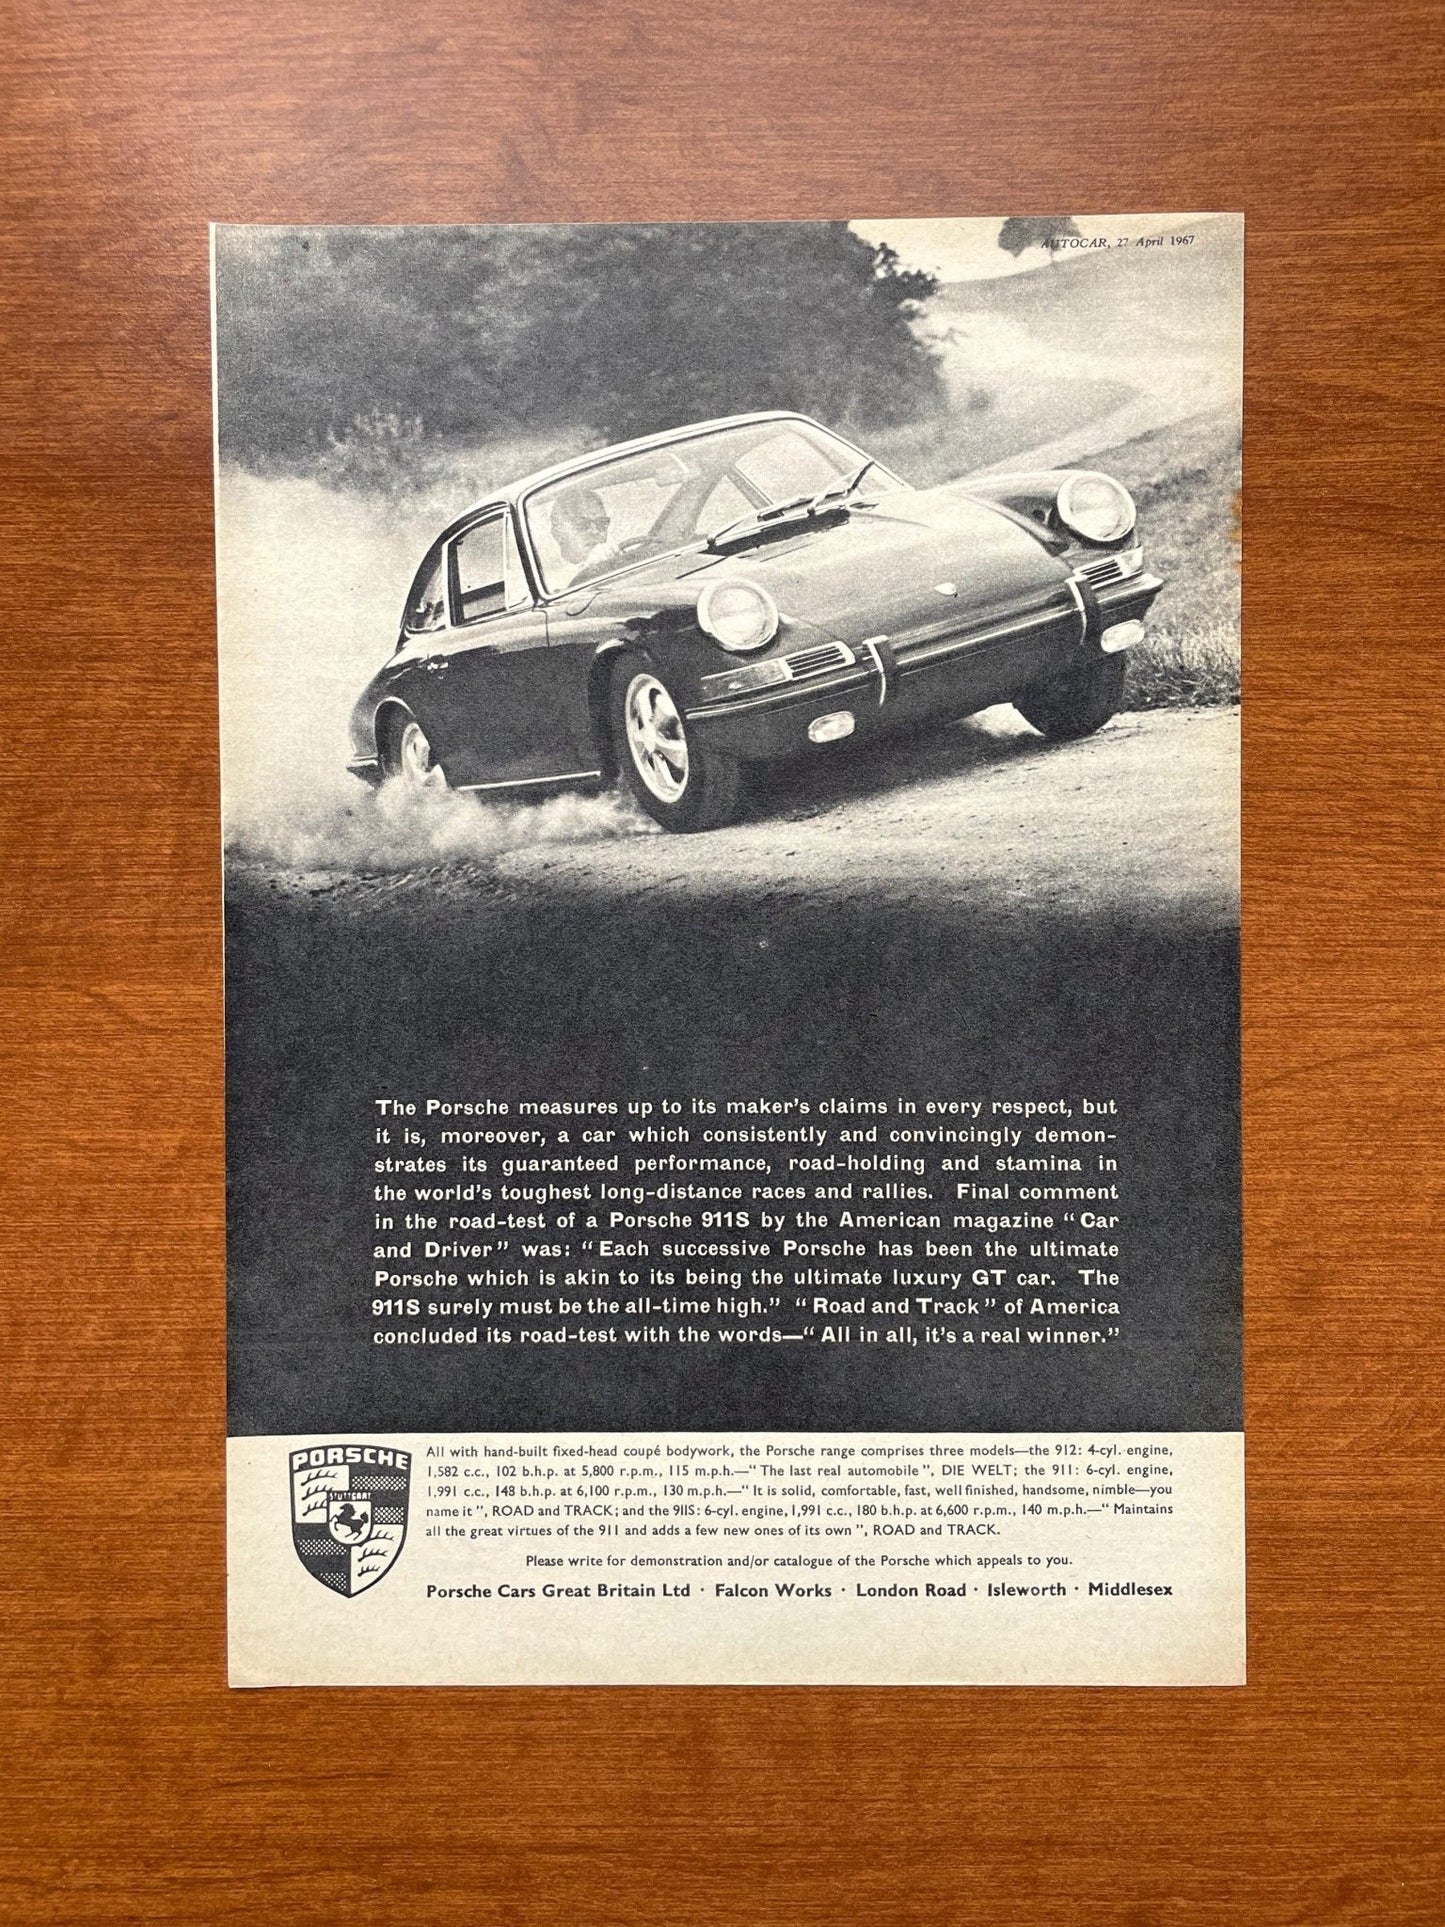 1967 Porsche 911S "measures up to its maker's claims..." Advertisement